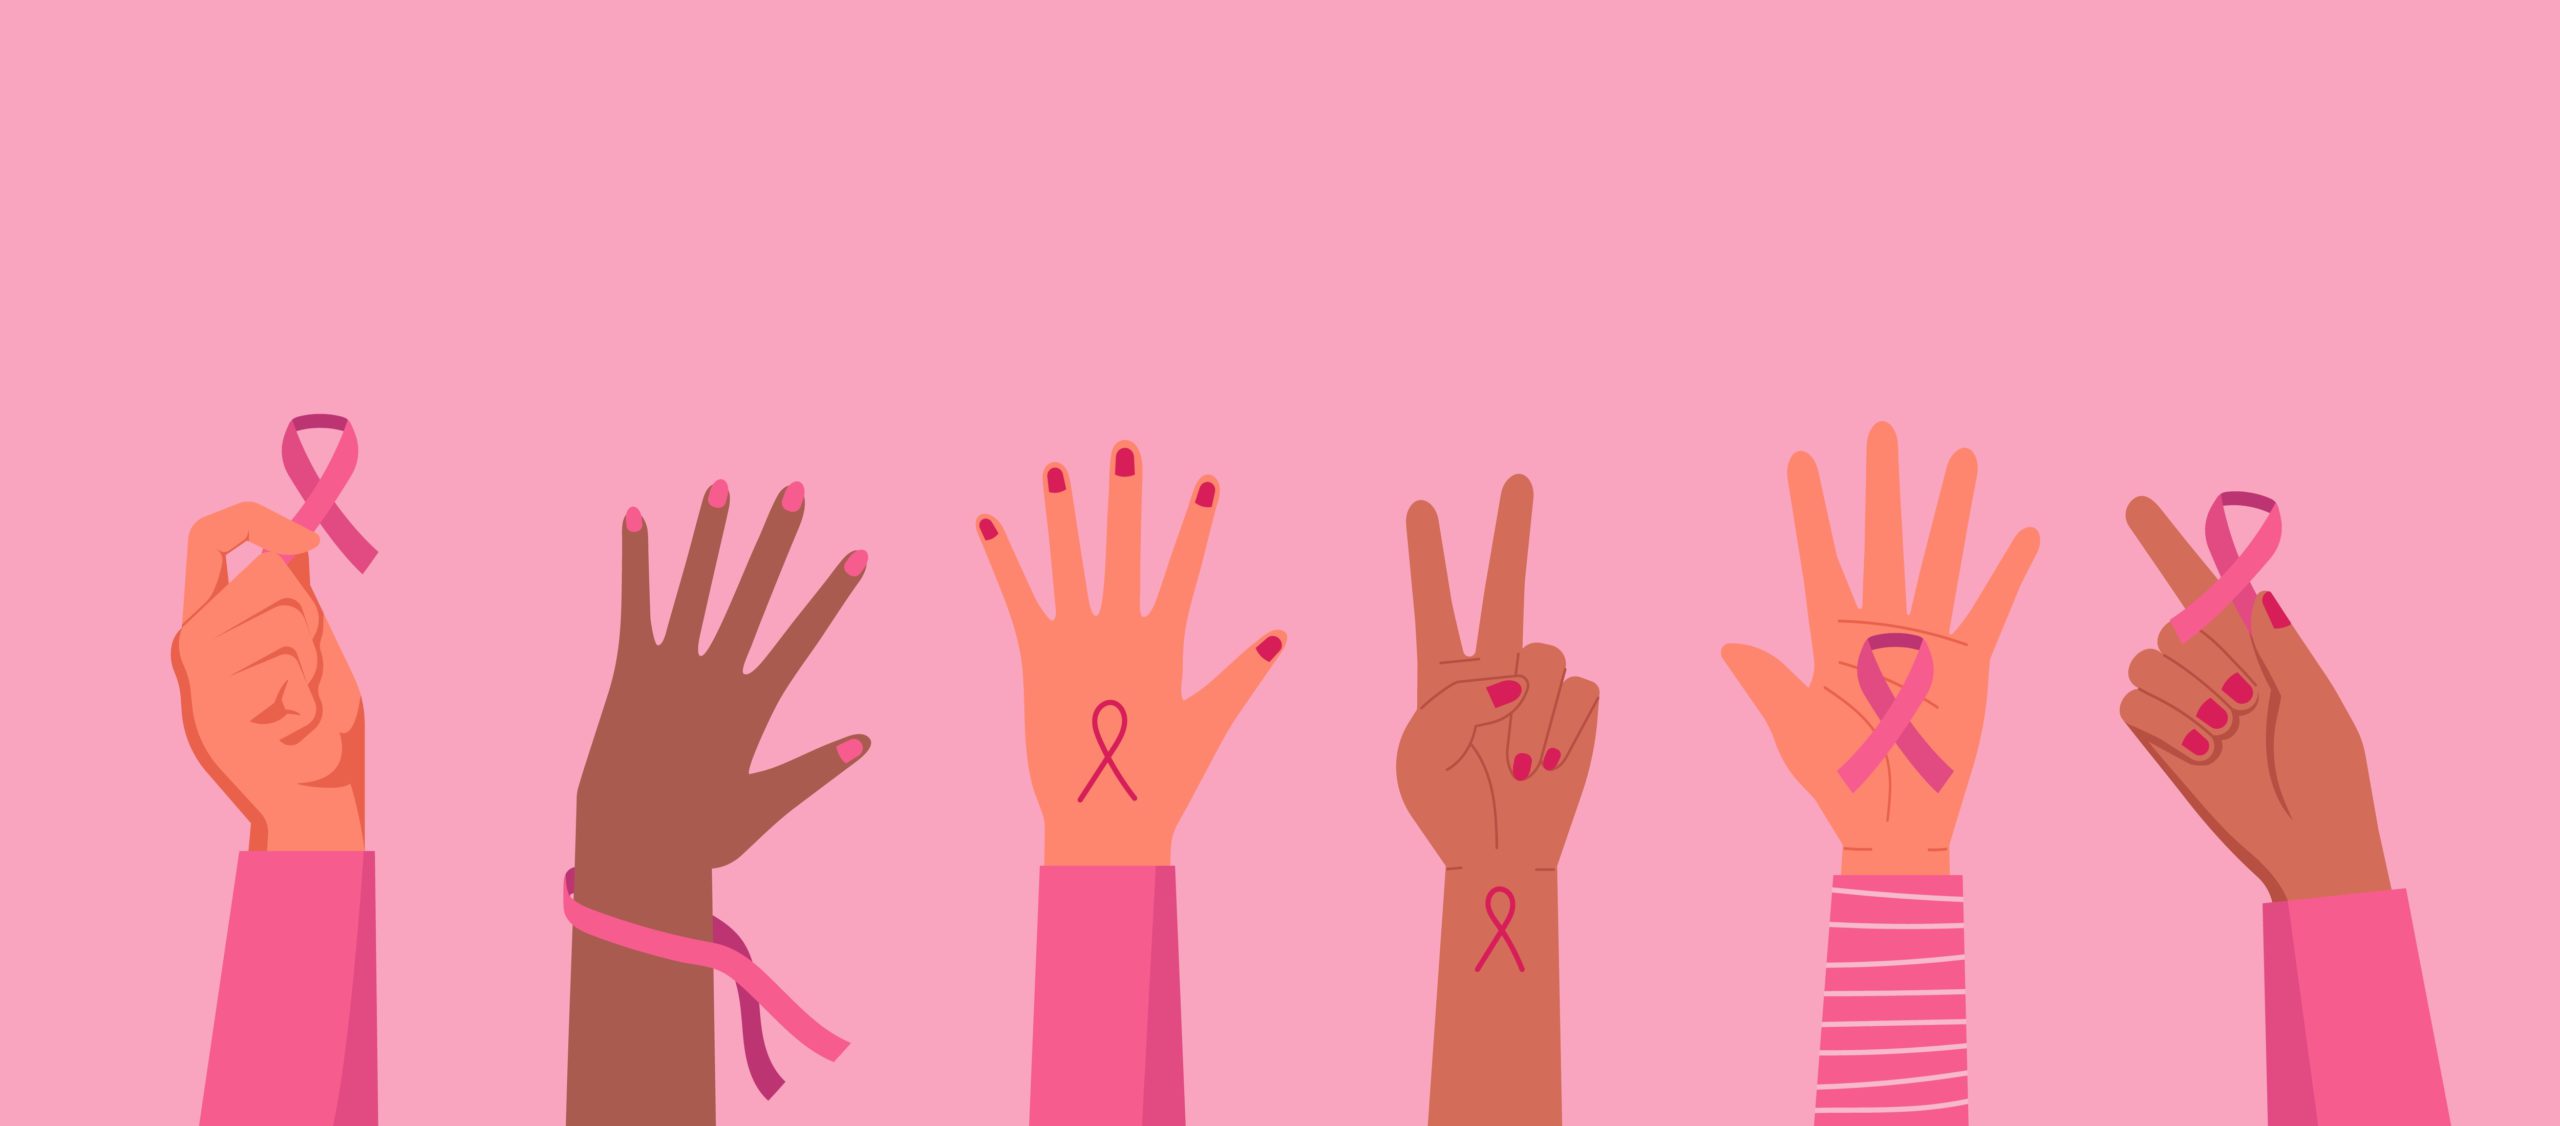 October is Breast Cancer Awareness Month - The Kim Foundation